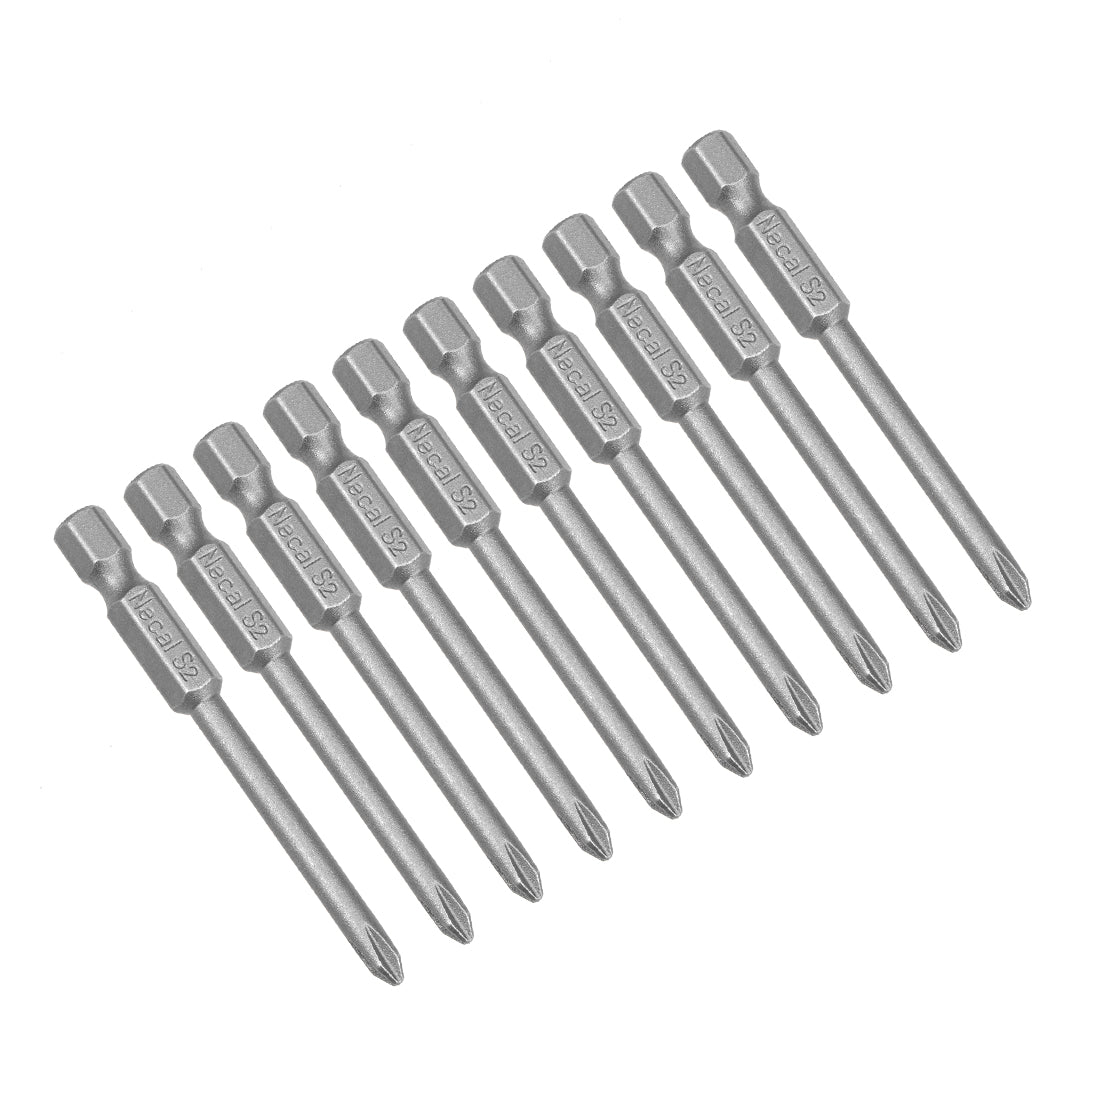 uxcell Uxcell 10 Pcs Magnetic Phillips Screwdriver Bits, Hex Shank S2 Power Tools